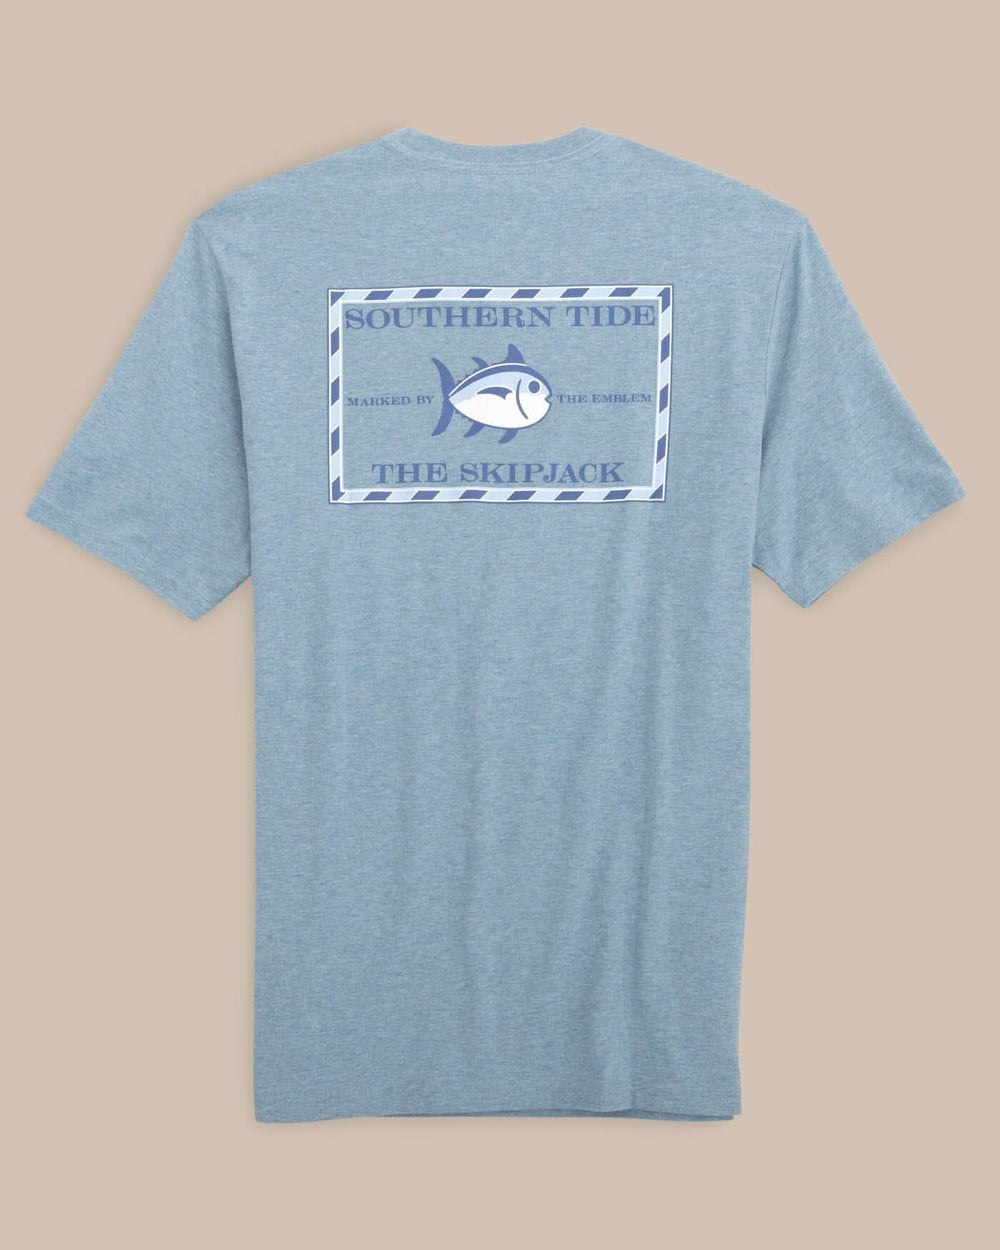 The back view of the Southern Tide Heathered Original Skipjack T-Shirt by Southern Tide - Heather Blue Shadow